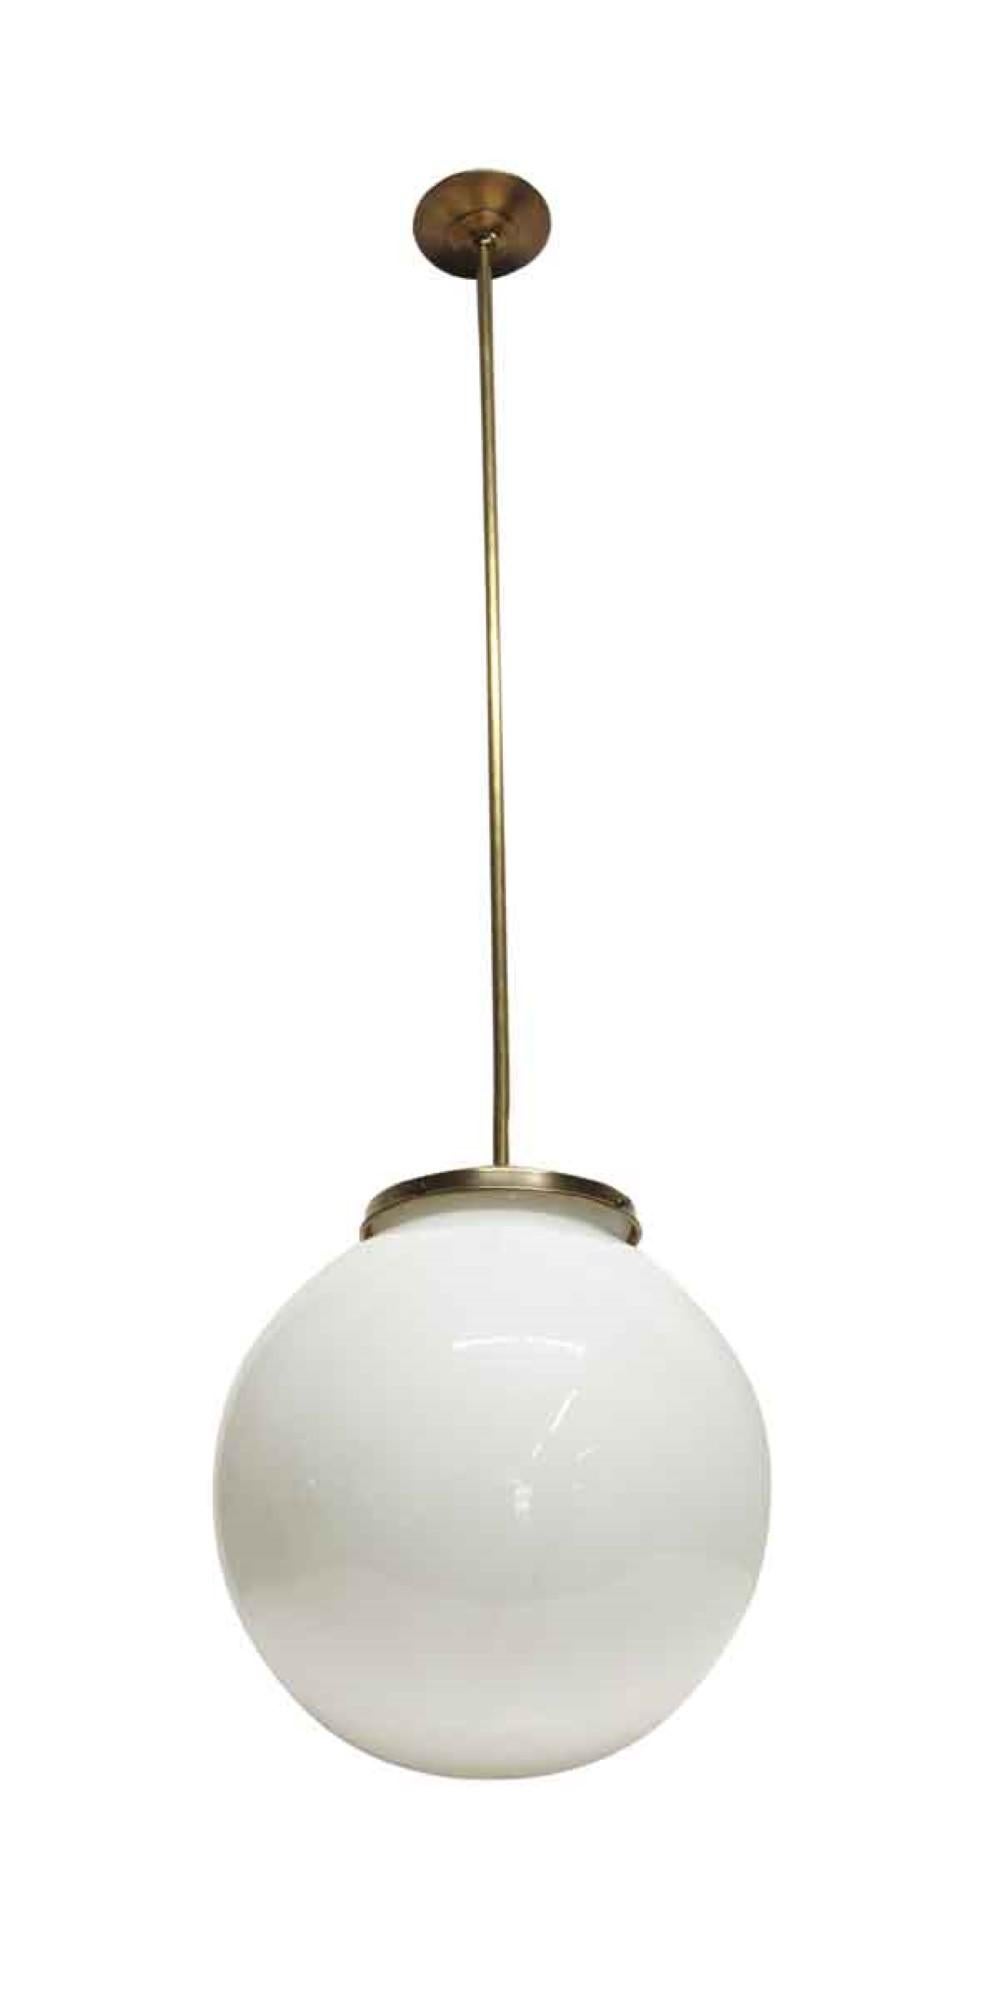 1960s Italian Mid-Century Modern spherical globe pendant light fixture. Featuring brass hardware. Small quantity available at time of posting. Please inquire. Priced each. Cleaned with new wire and socket. Please note, this item is located in one of